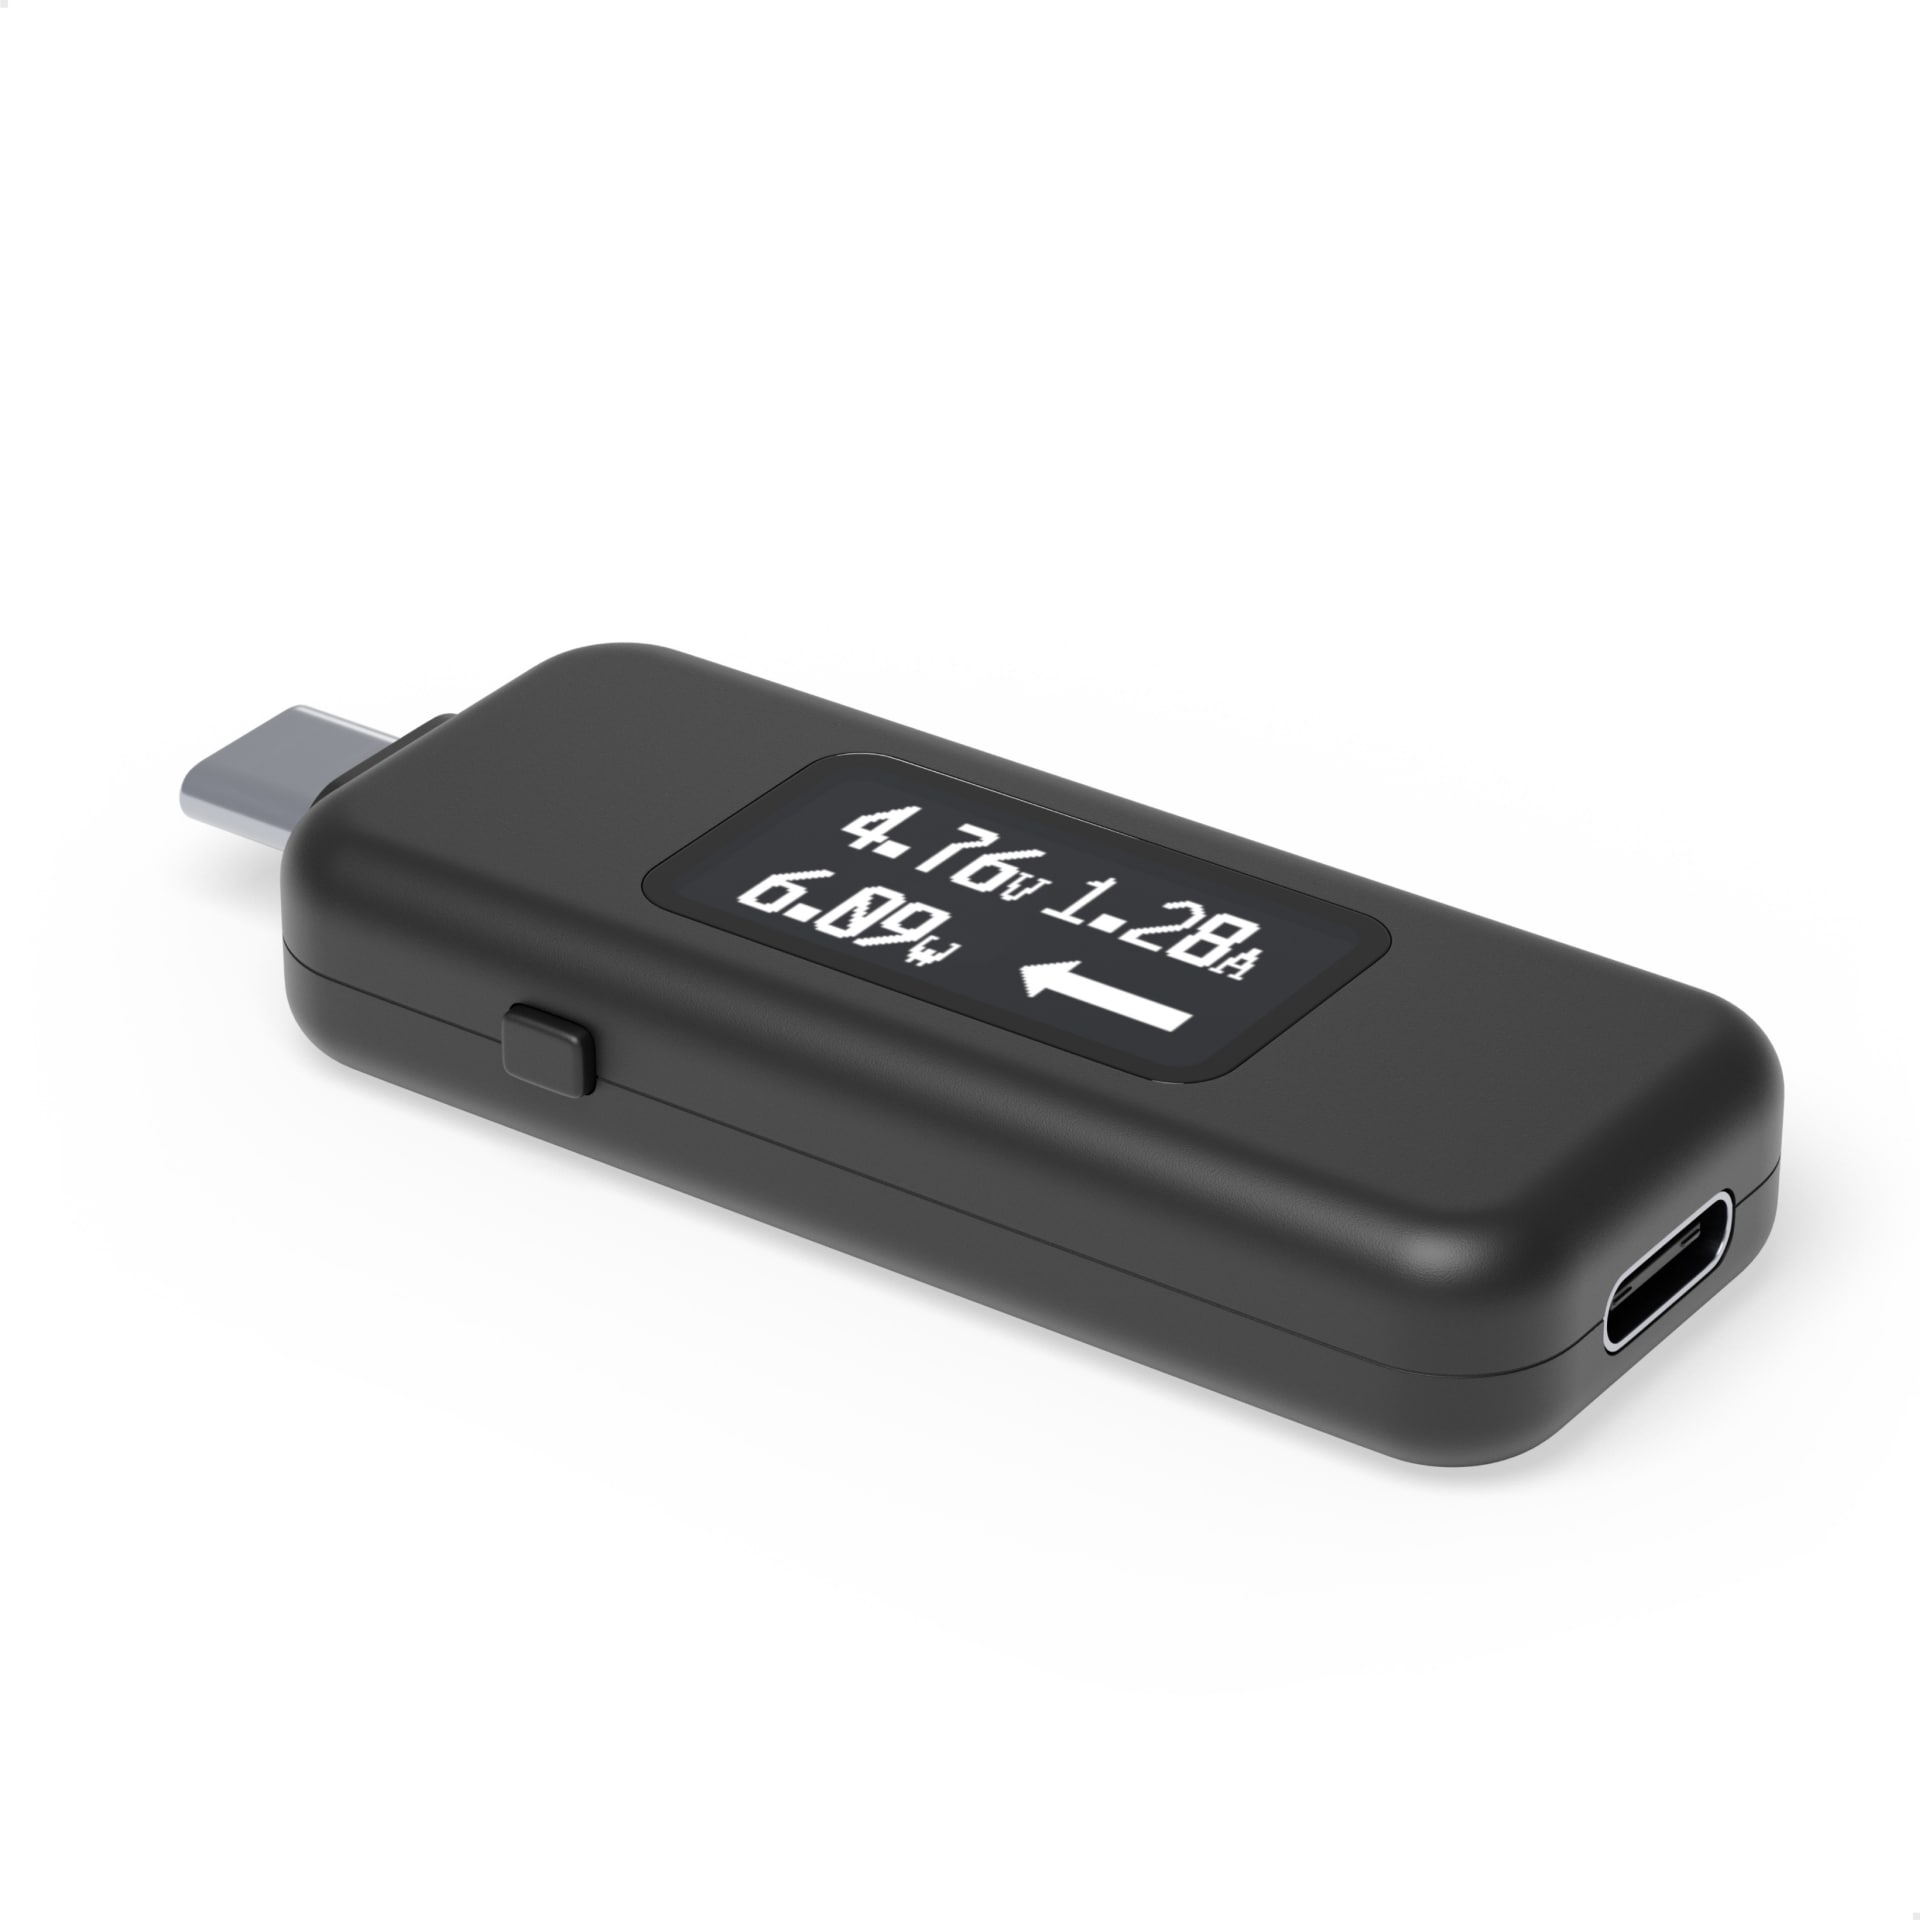 Plugable USB C Power Meter Tester for Monitoring USB-C Connections up to 240W for Laptops, Phones, Chargers -Driverless